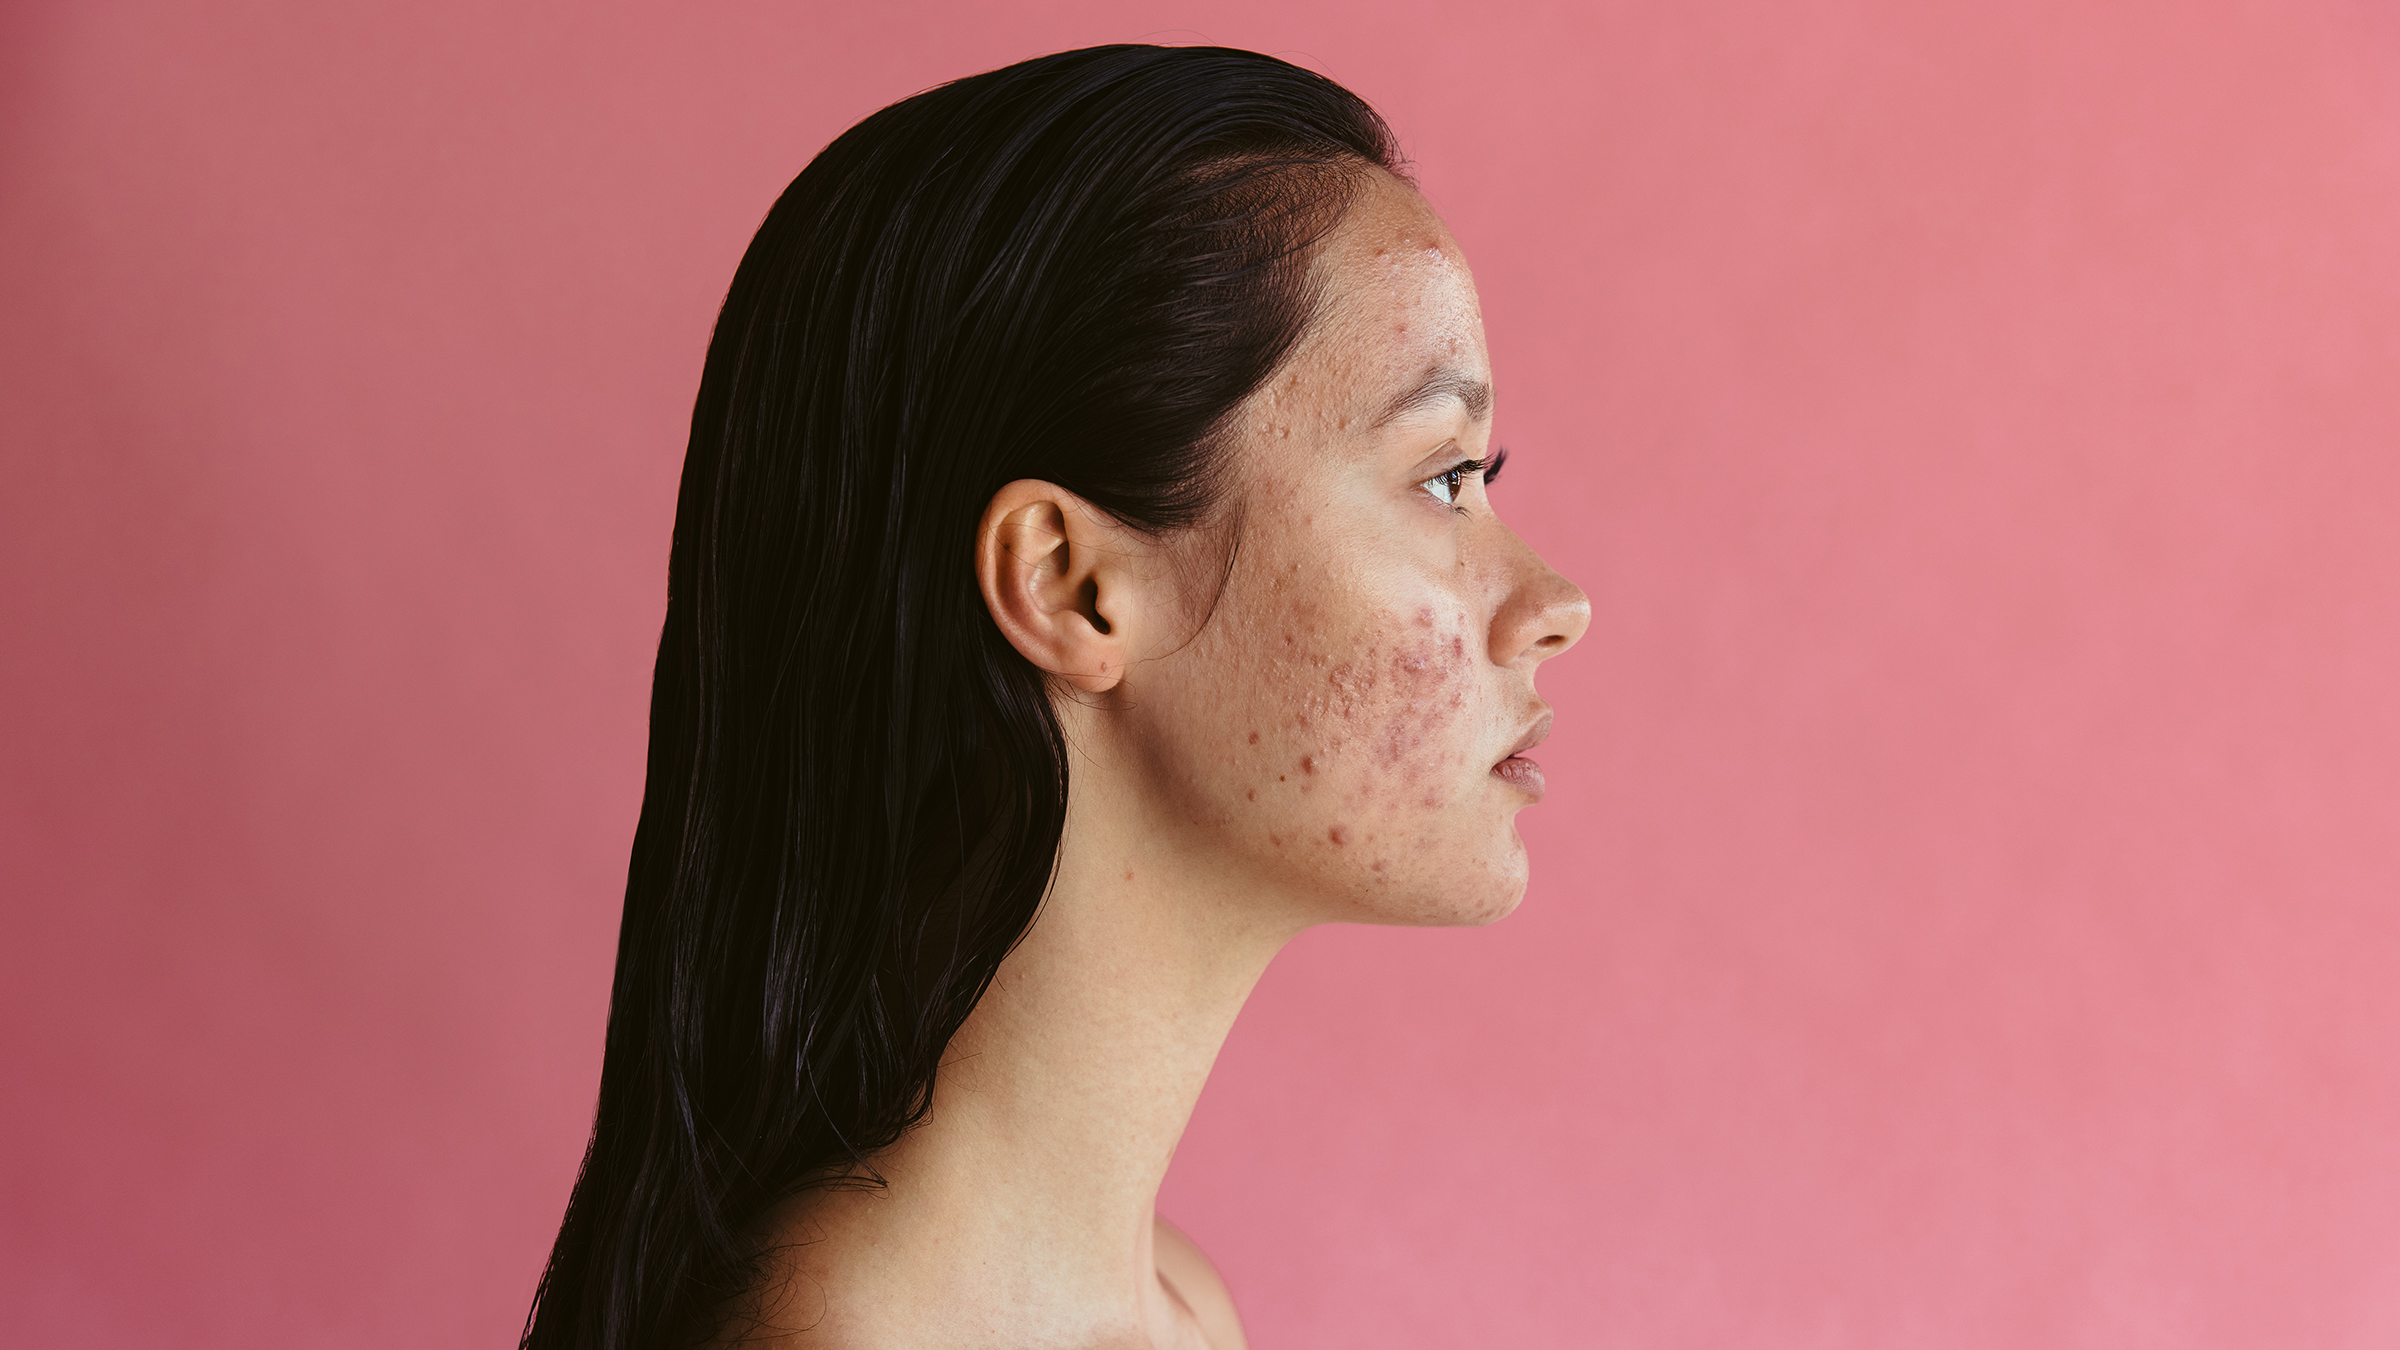 How to Get Rid of Pesky Pimples Fast With These 7 Tips - GoodRx